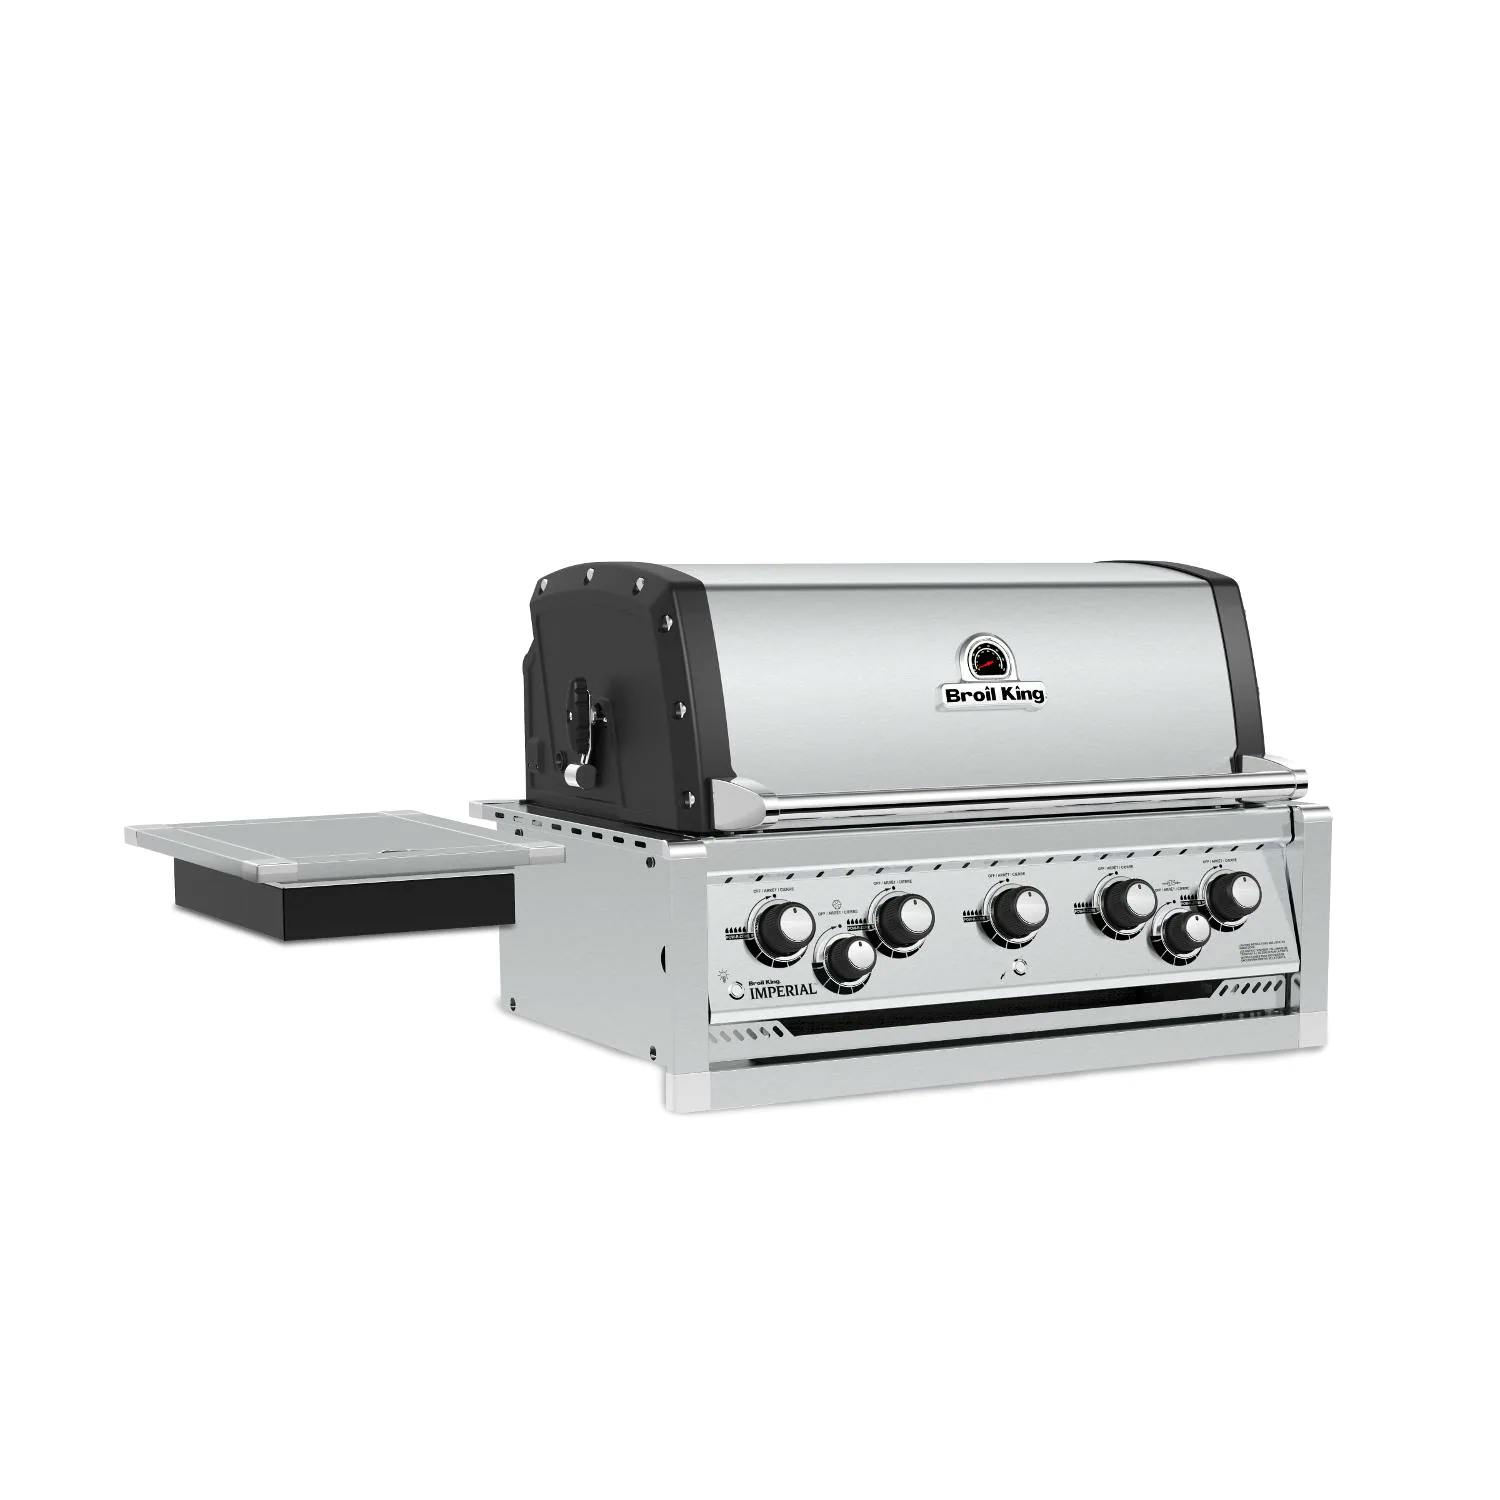 Broil King Imperial 590 Built-in Gas Grill with Rotisserie & Side Burner